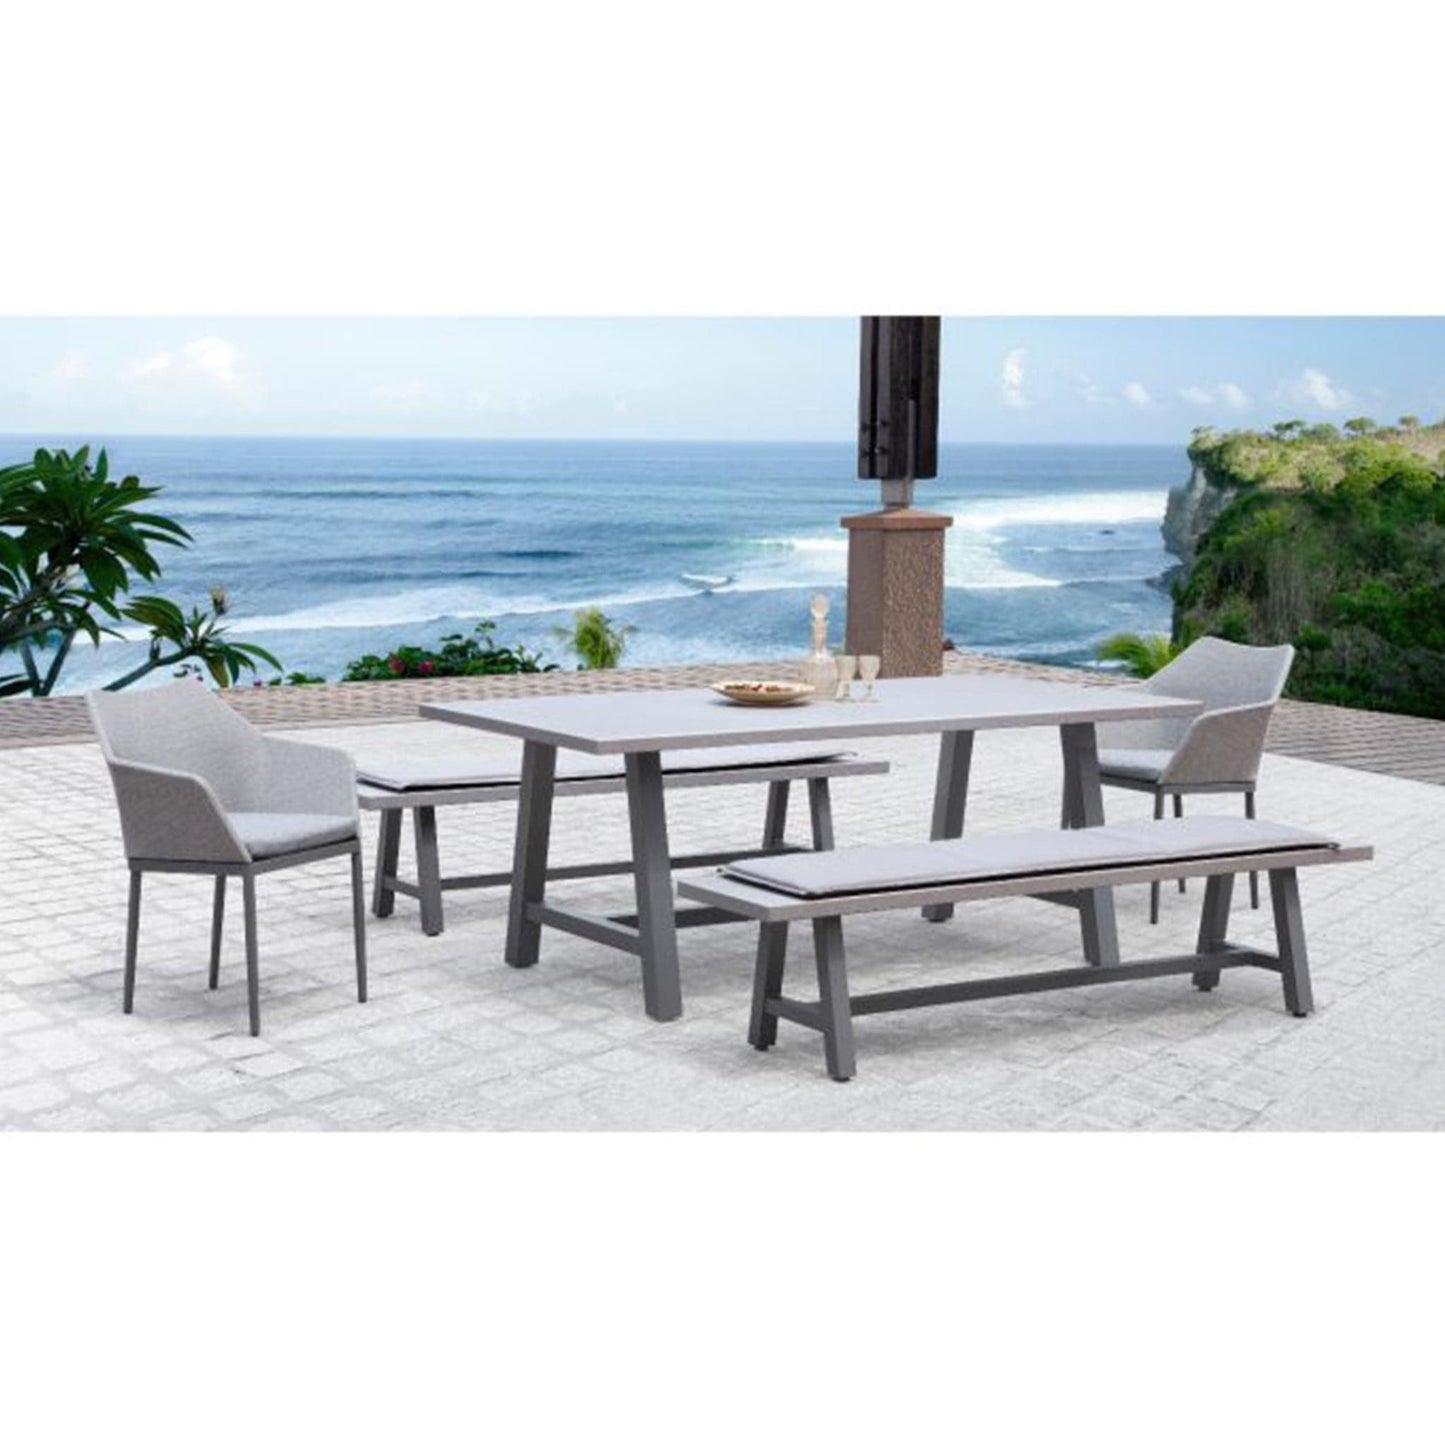 Commons Tailor 5 Piece Bench Dining Set